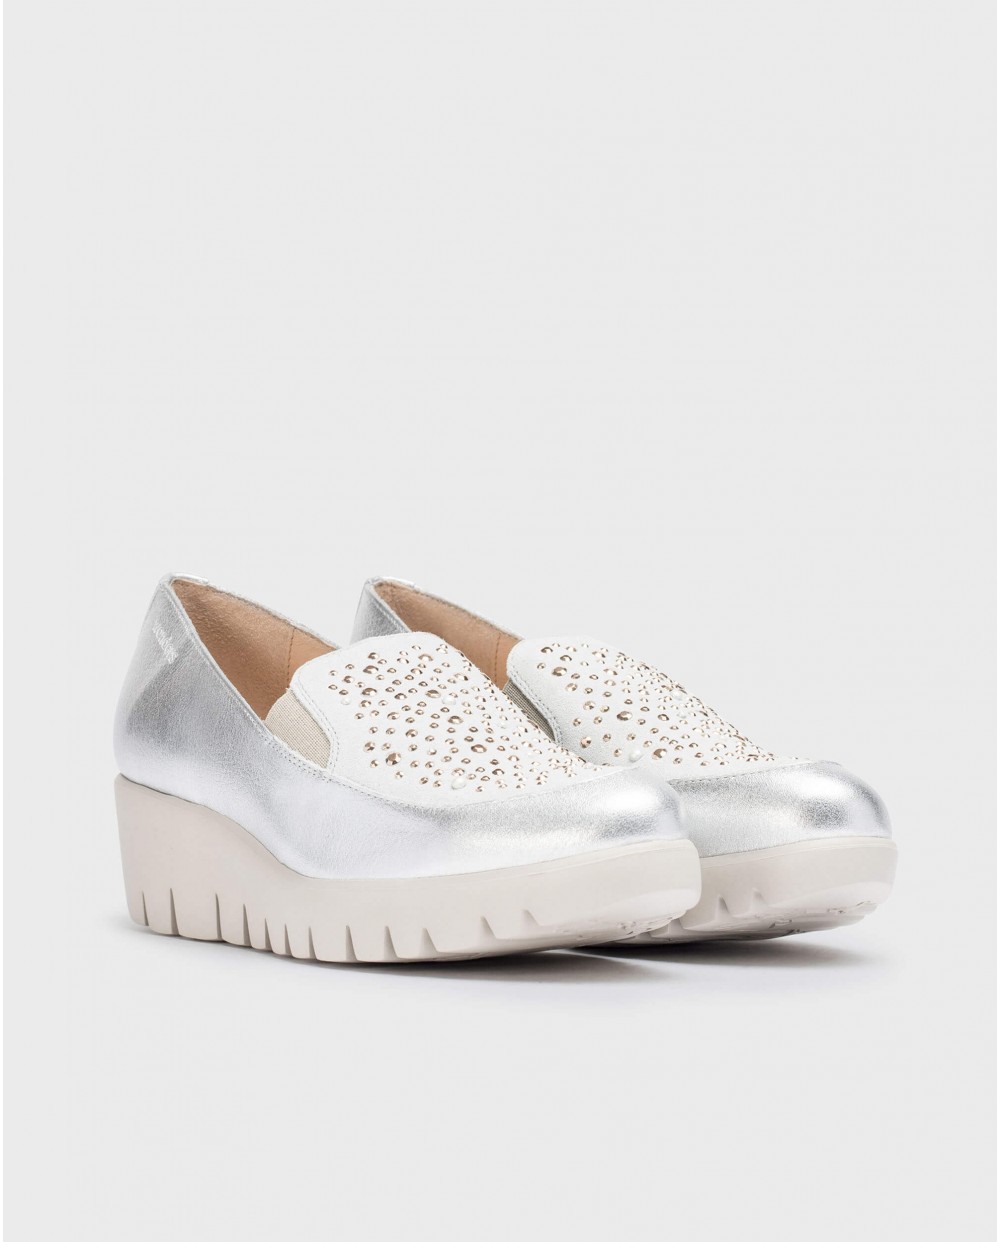 Wonders-Loafers-Metallic patent leather Diamant loafer